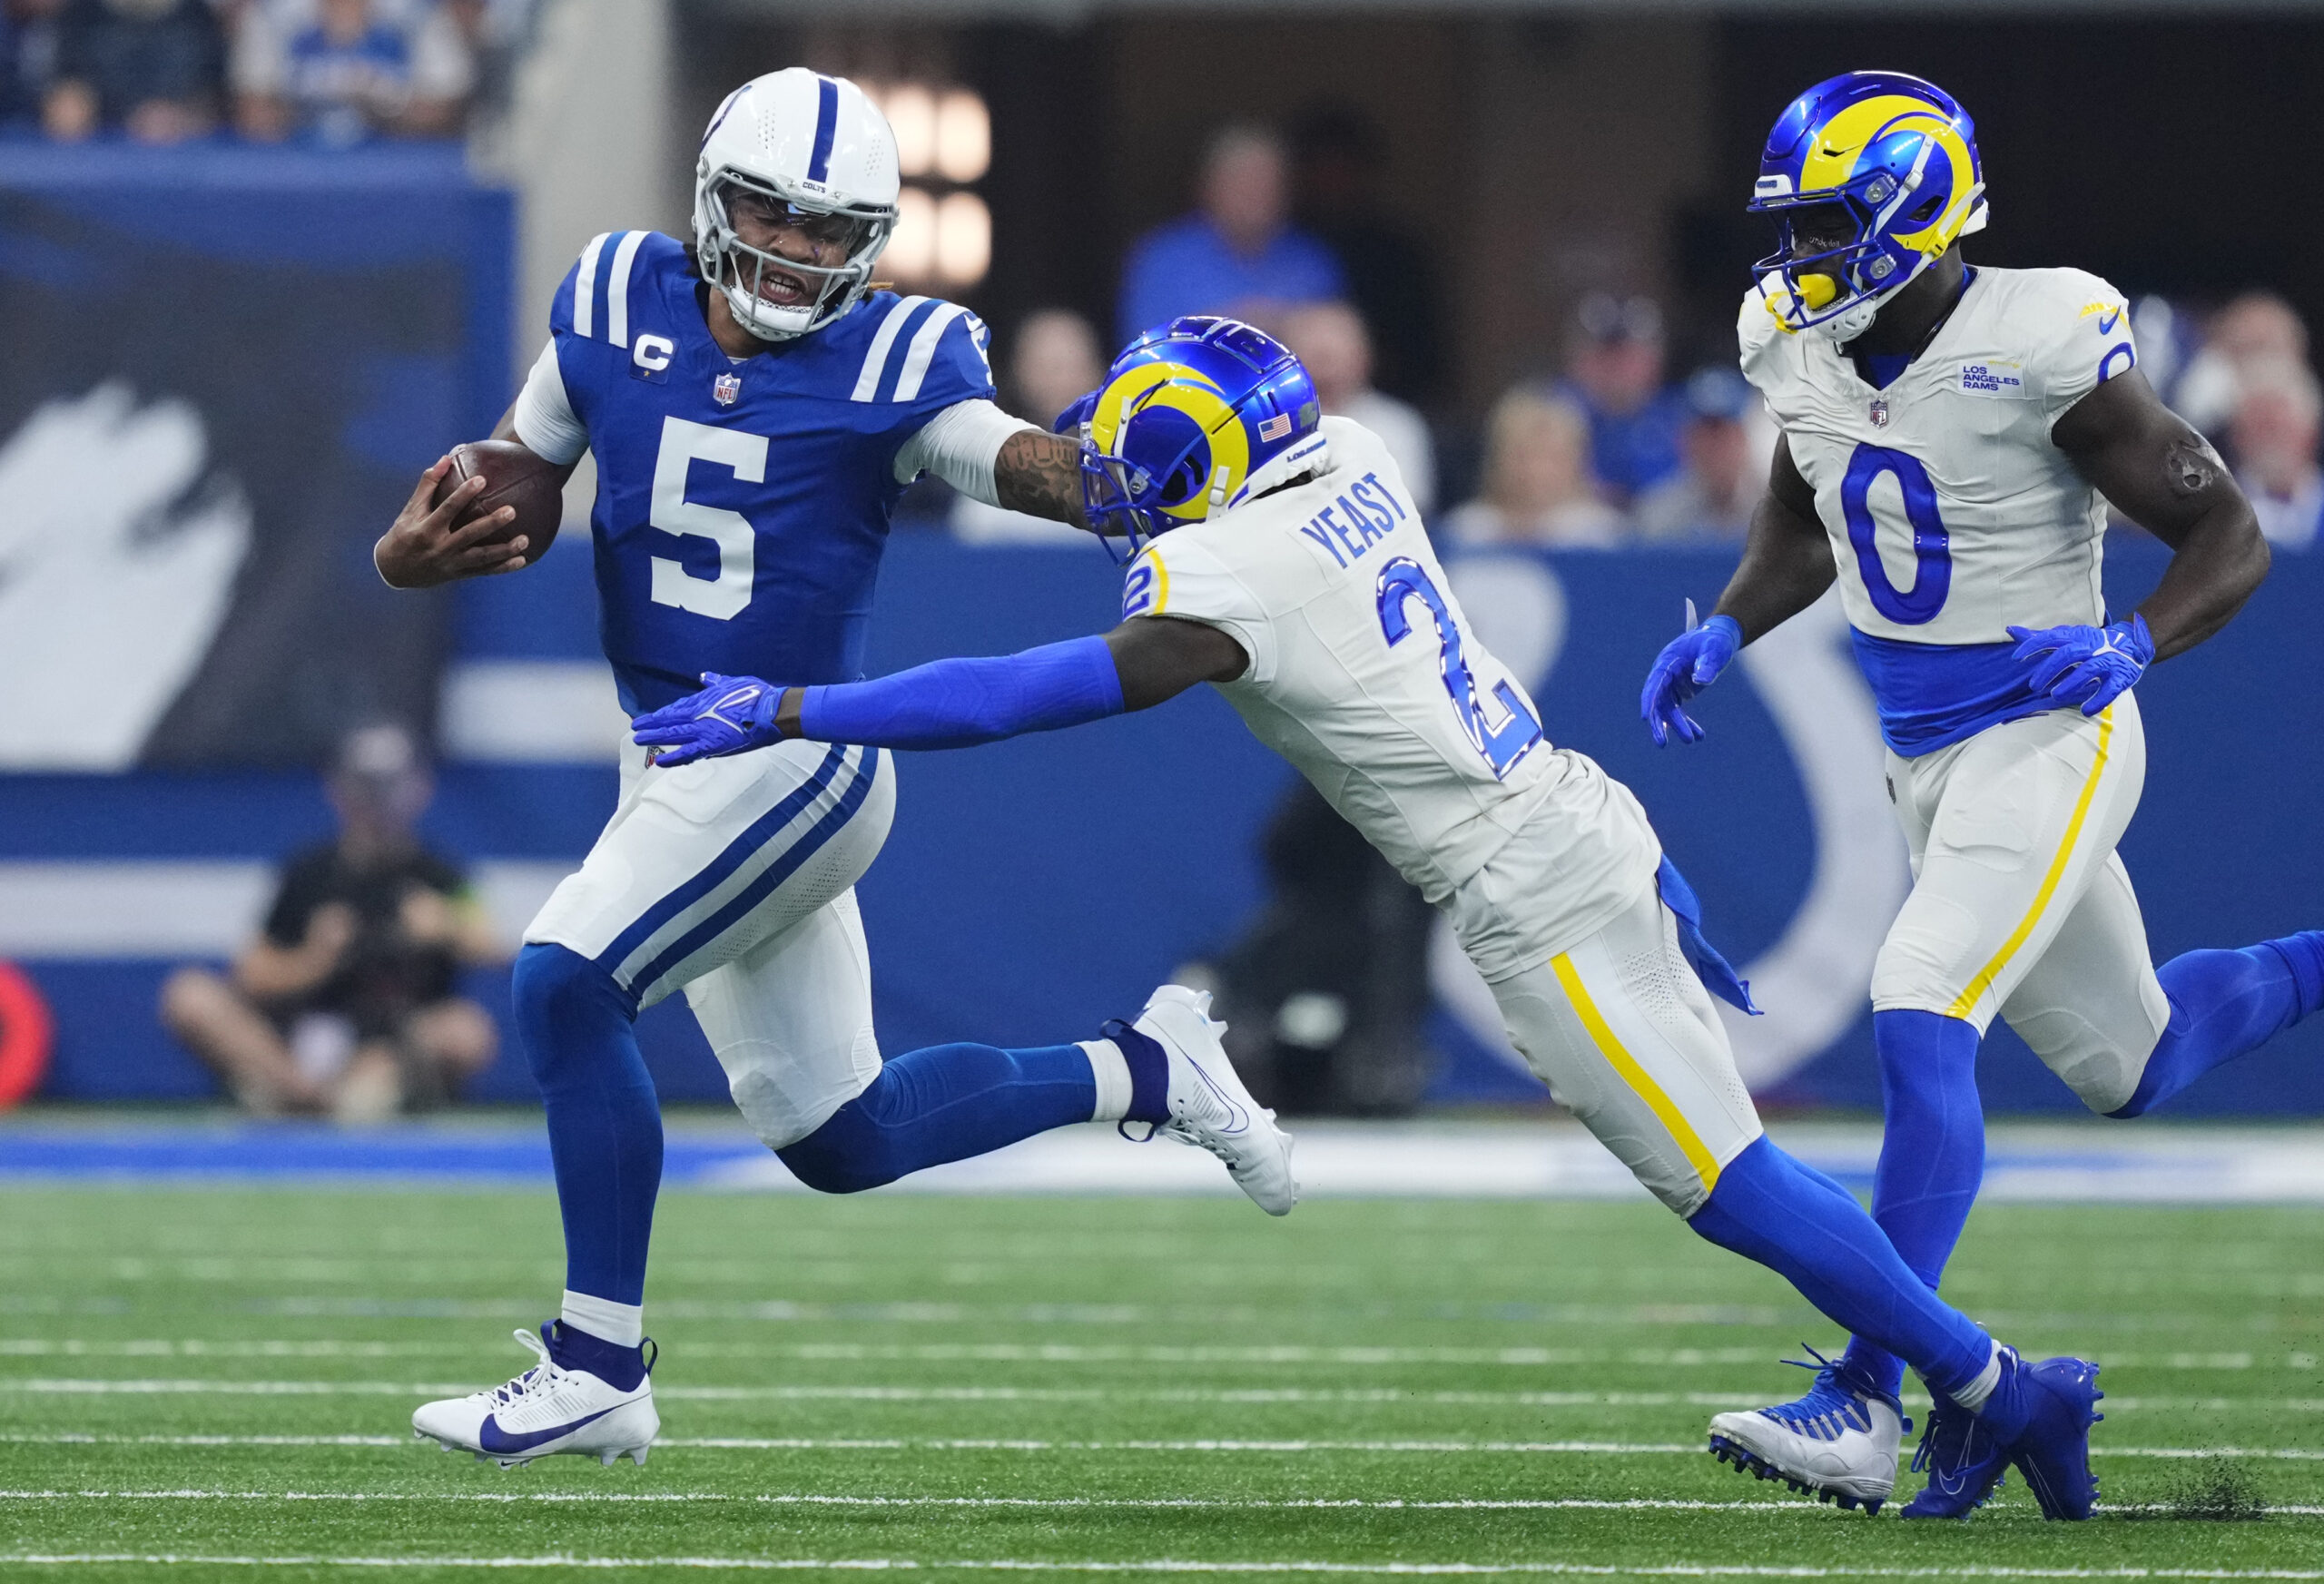 Colts down big at halftime against the Rams - WISH-TV